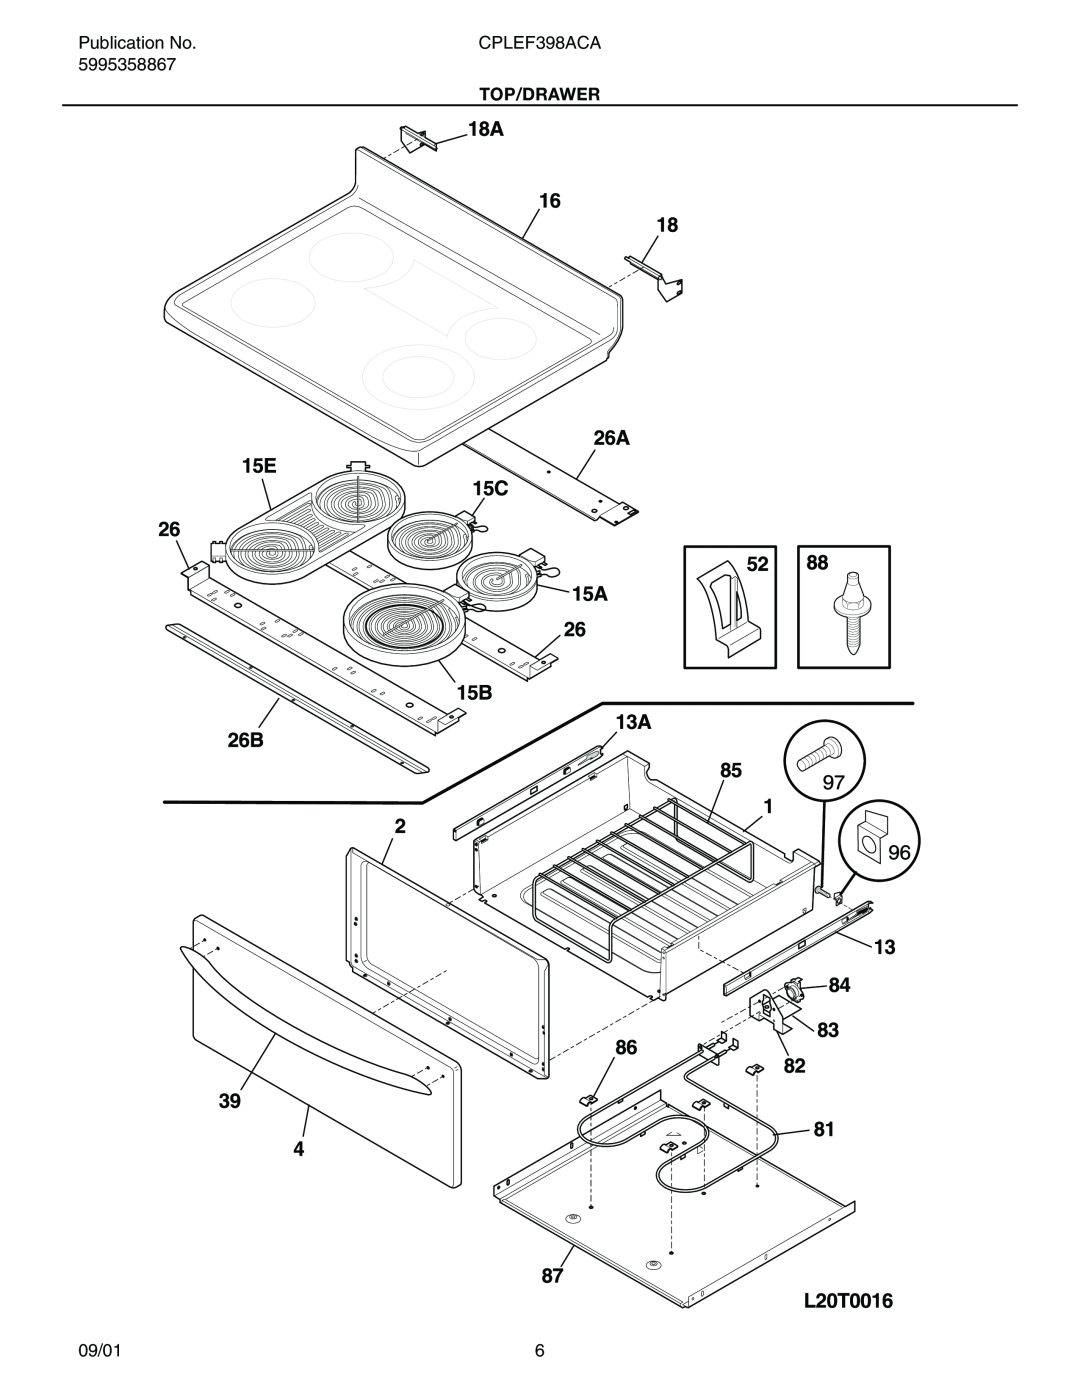 Electrolux installation instructions Publication No, CPLEF398ACA, 5995358867, Top/Drawer, 09/01 